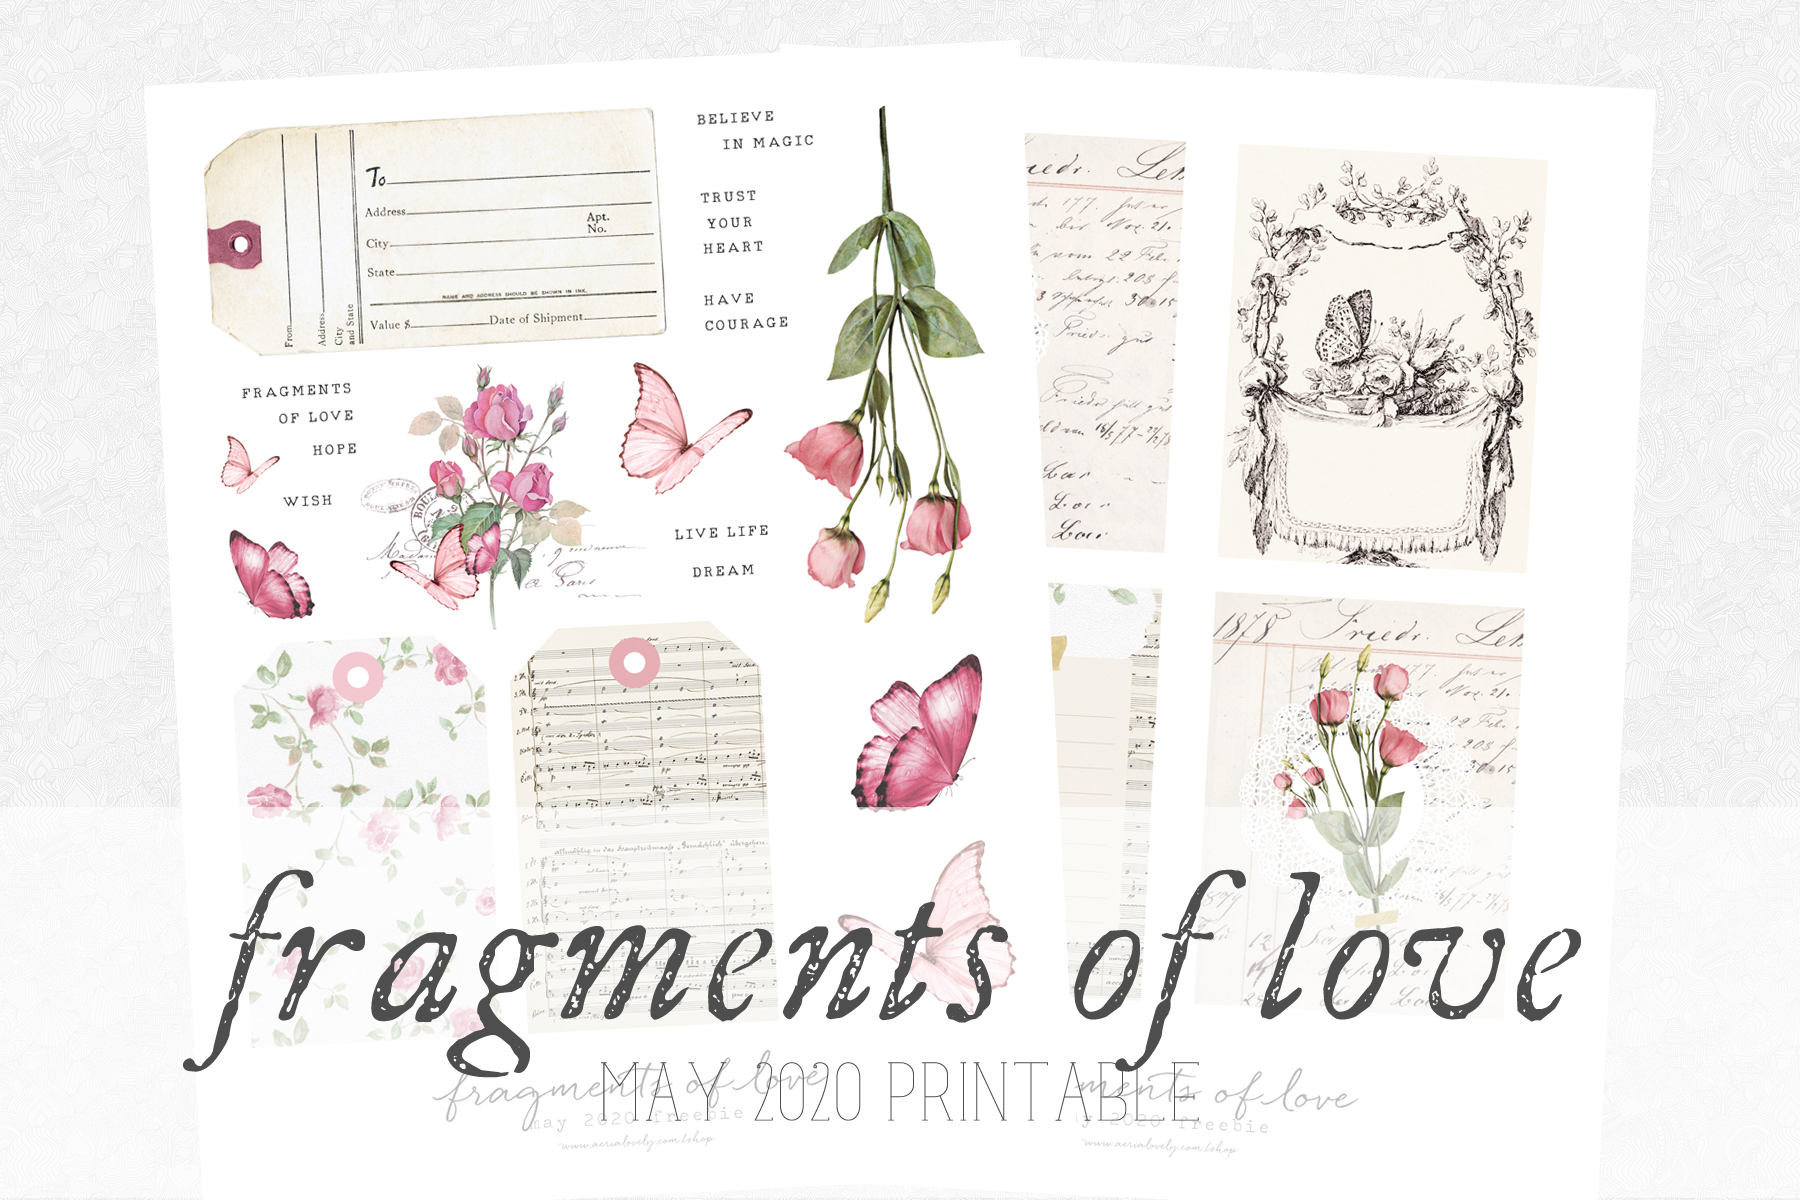 Fragments of Love